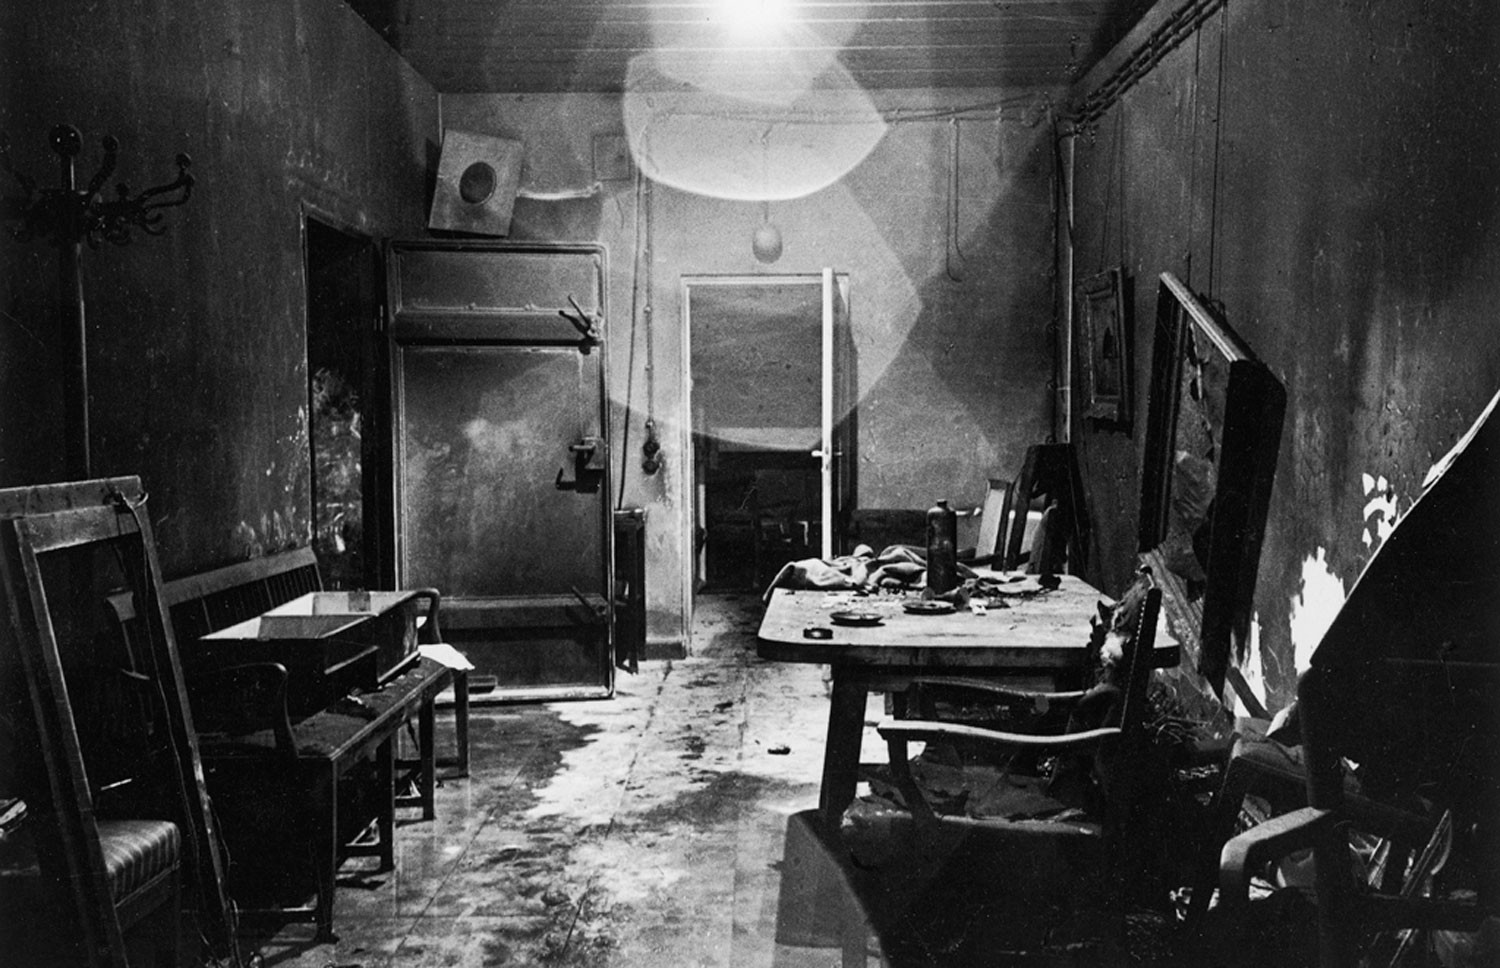 One of the first photos that was taken inside of Hitlers bunker Fhrerbunker in 1945 by Allied soldiers